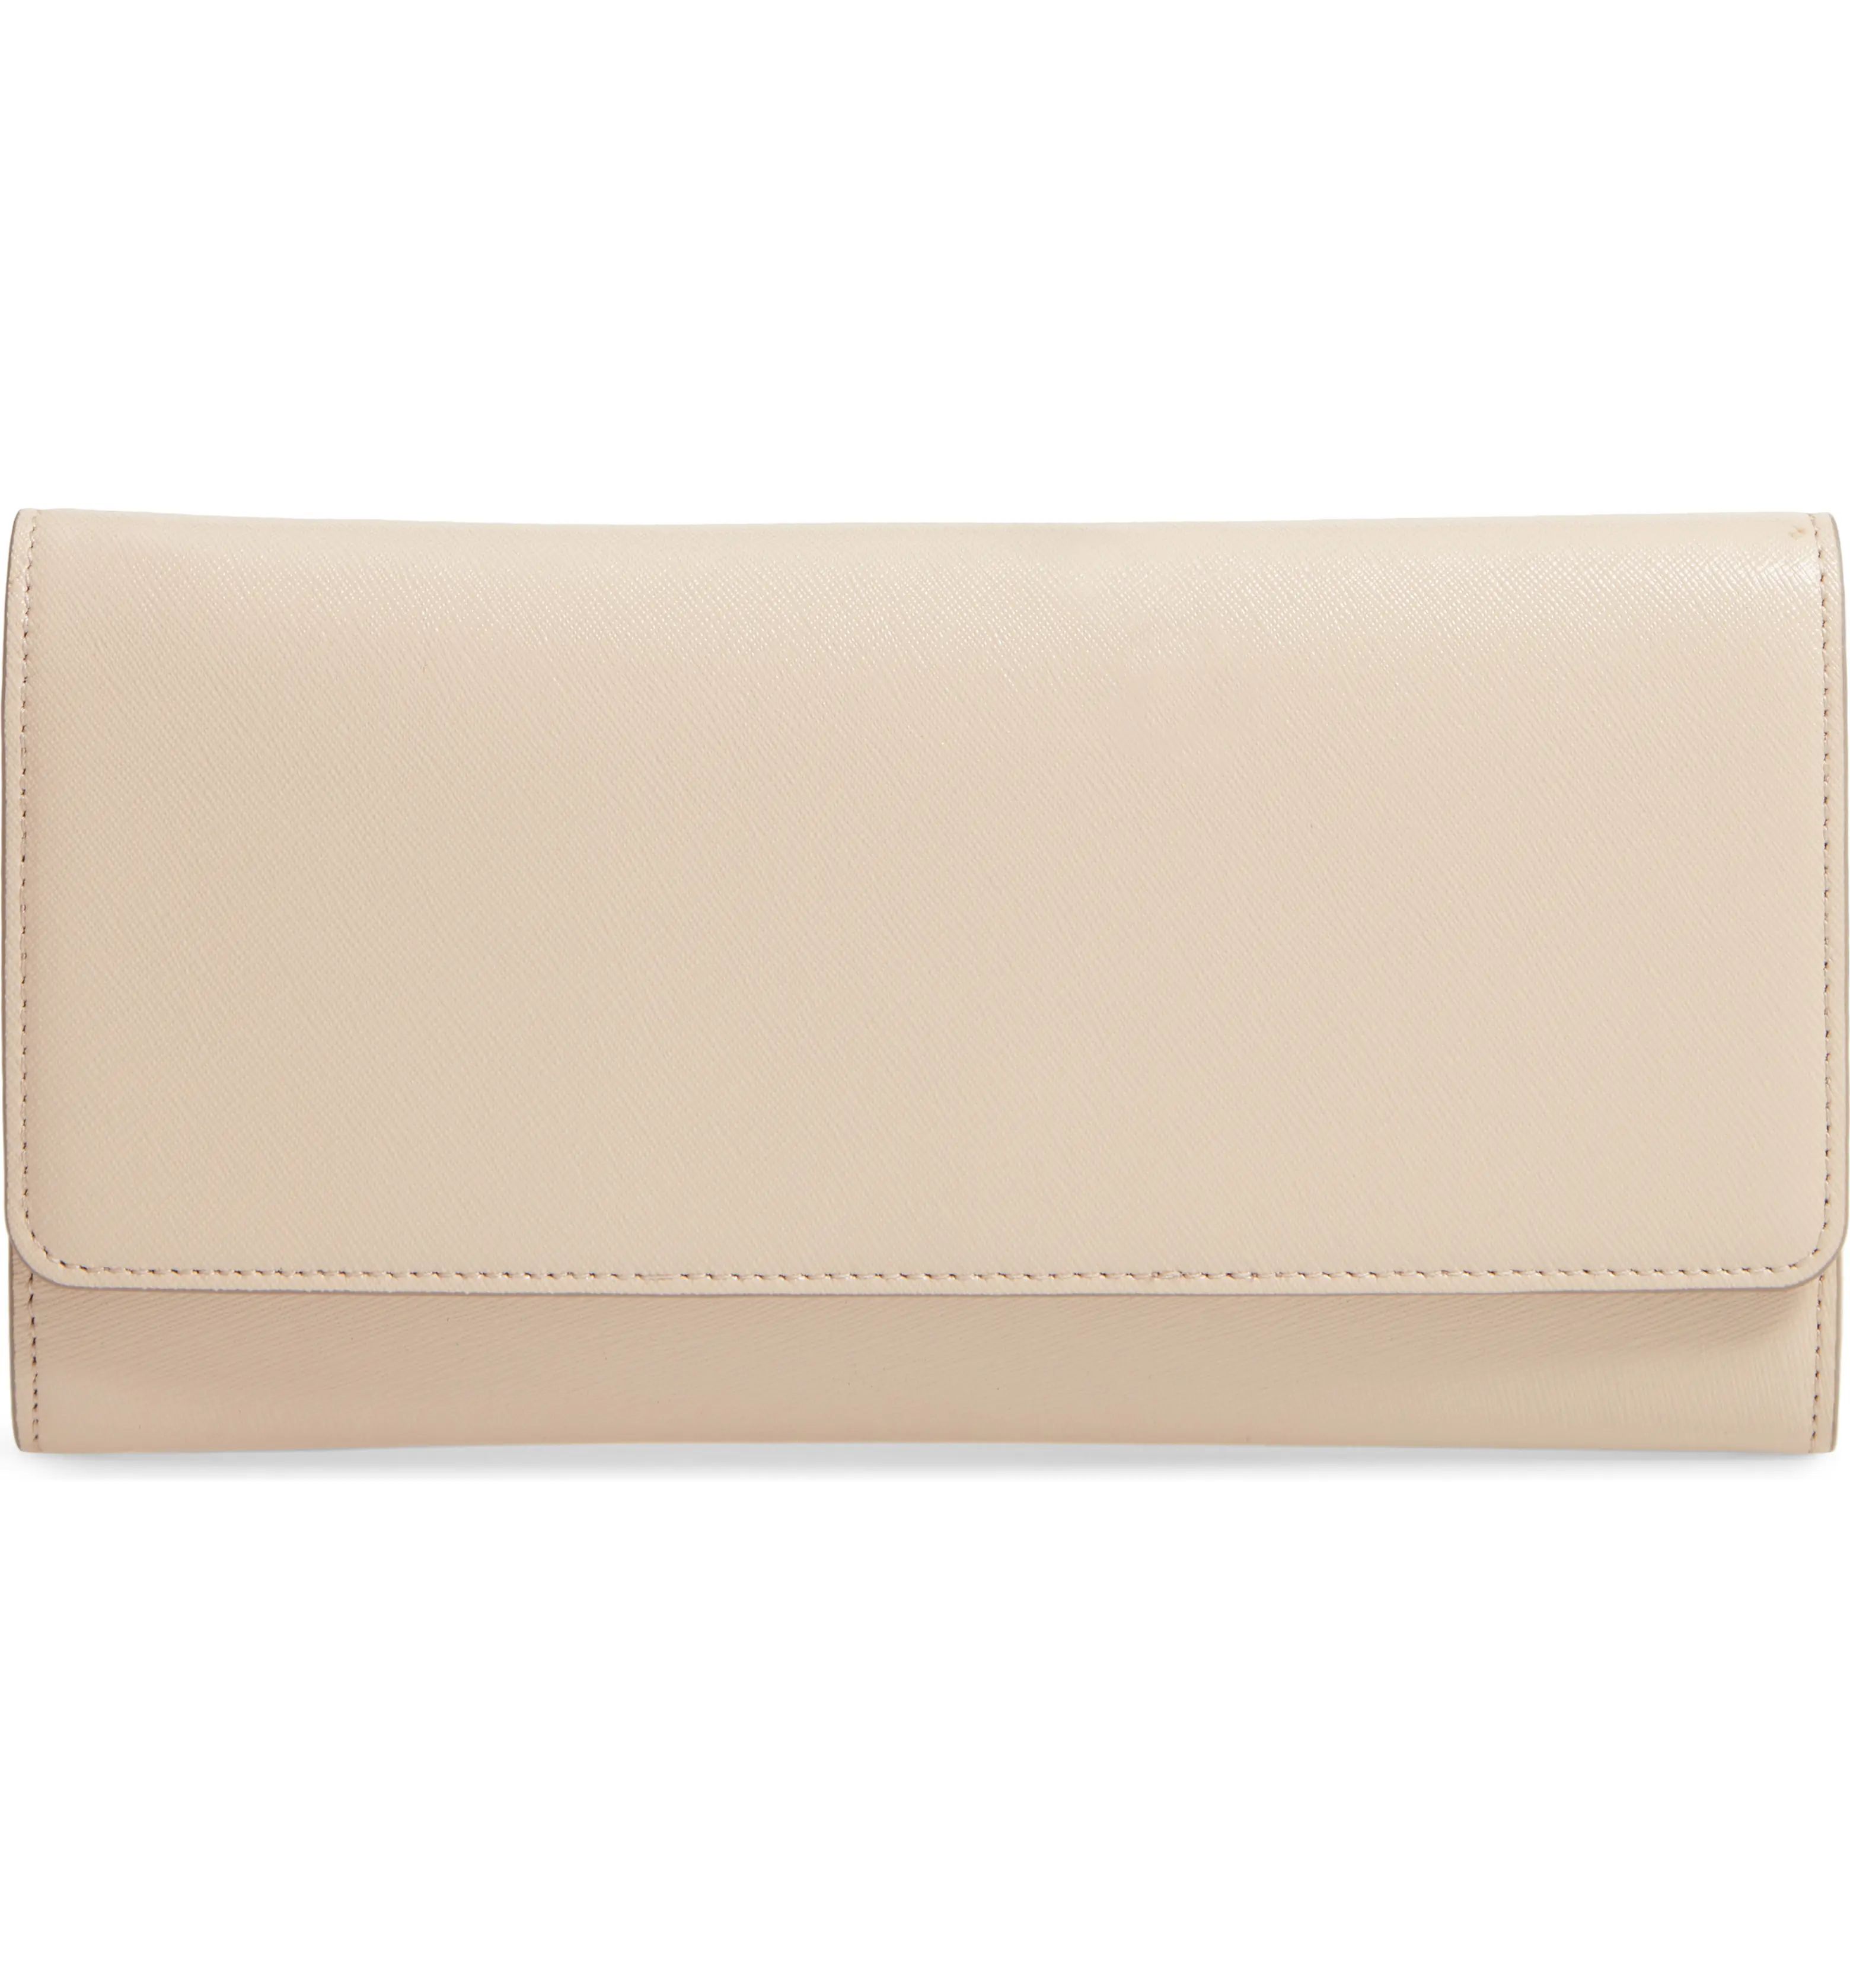 Selena Leather Clutch | Nordstrom